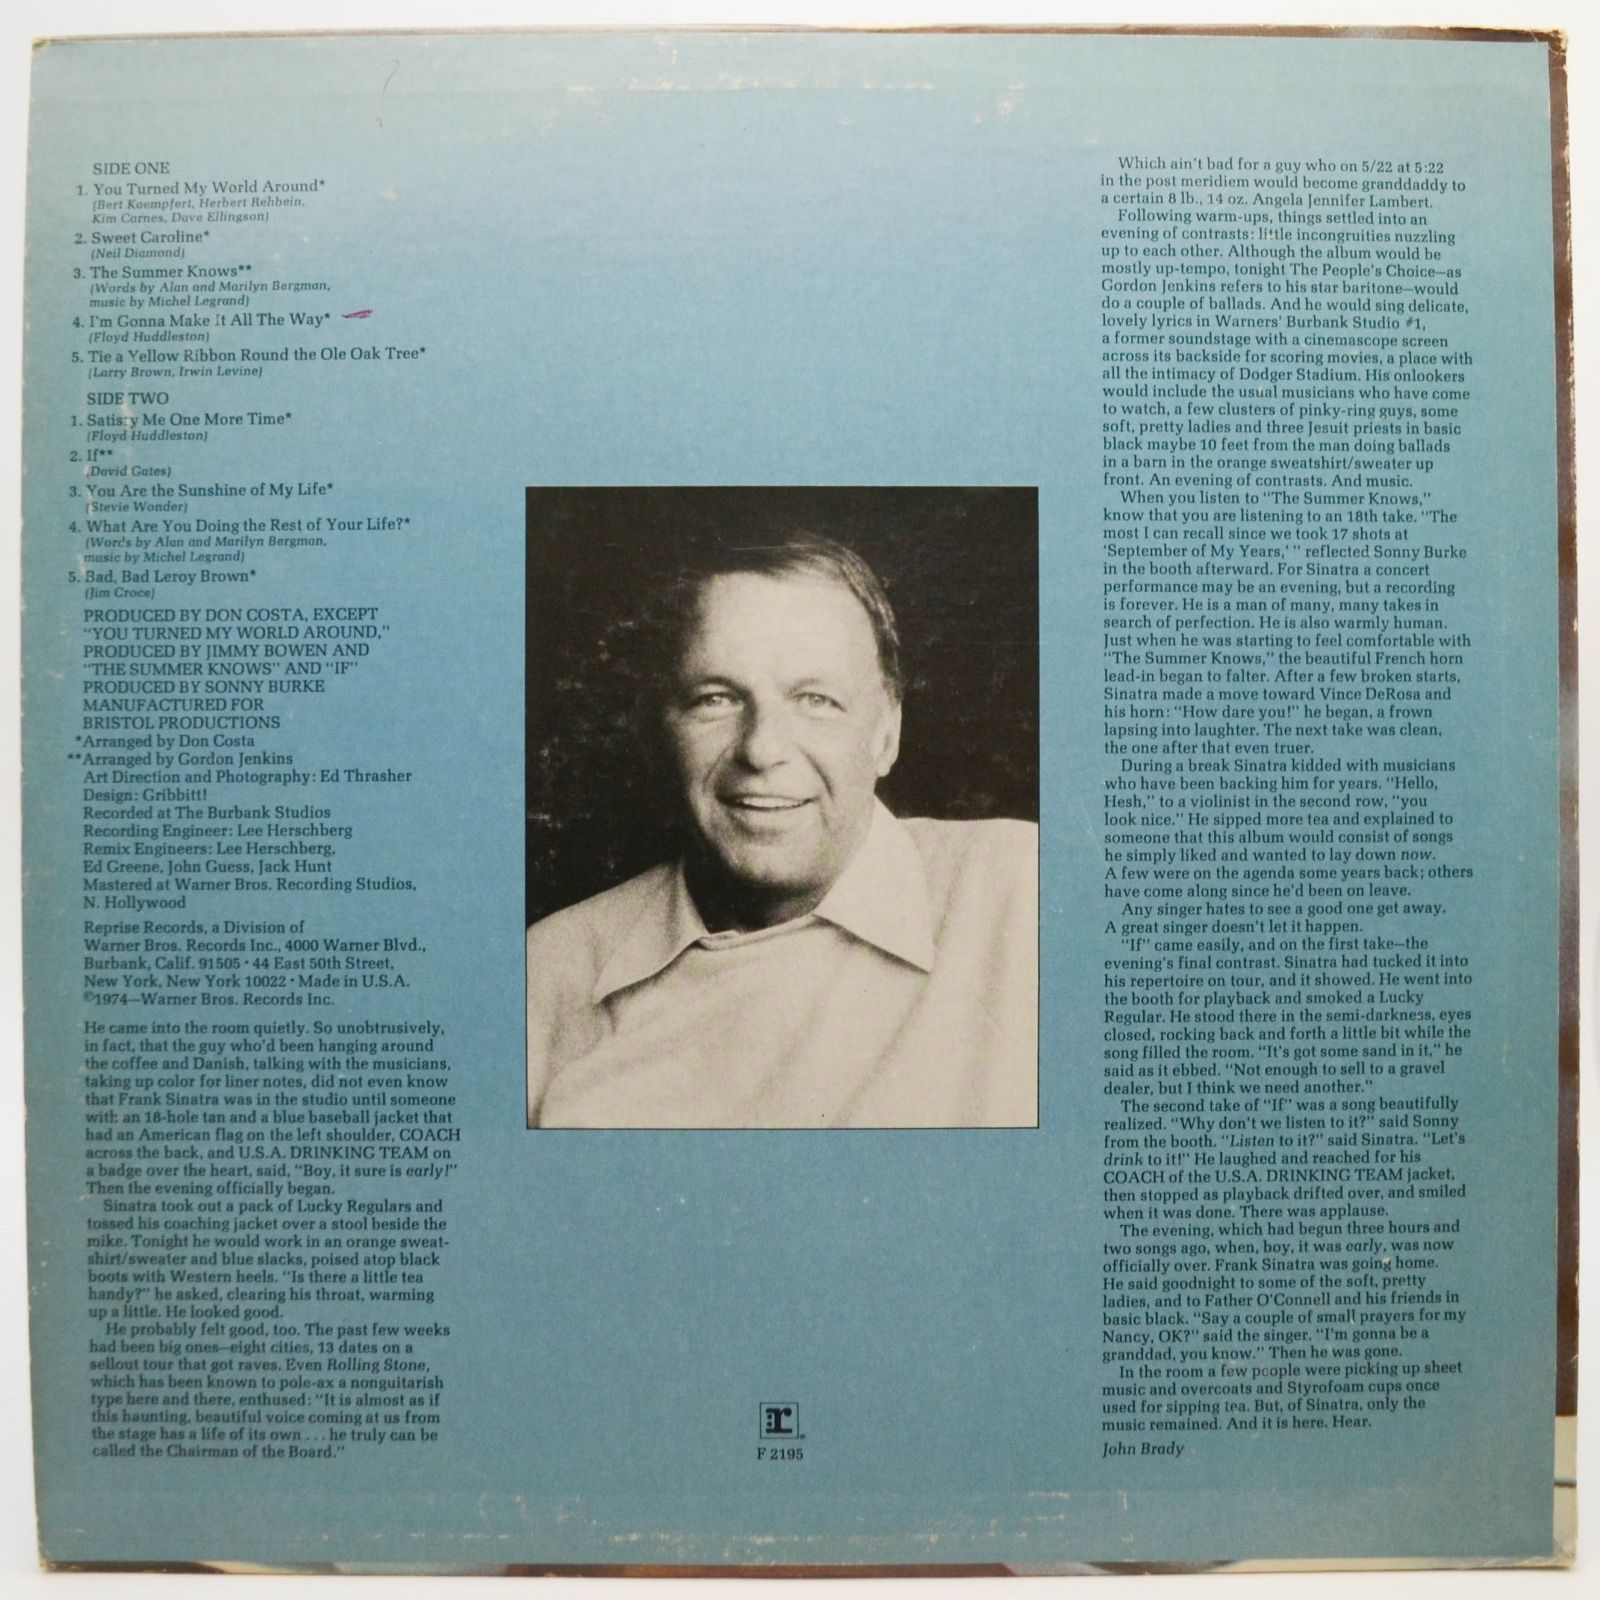 Frank Sinatra — Some Nice Things I've Missed (USA), 1974